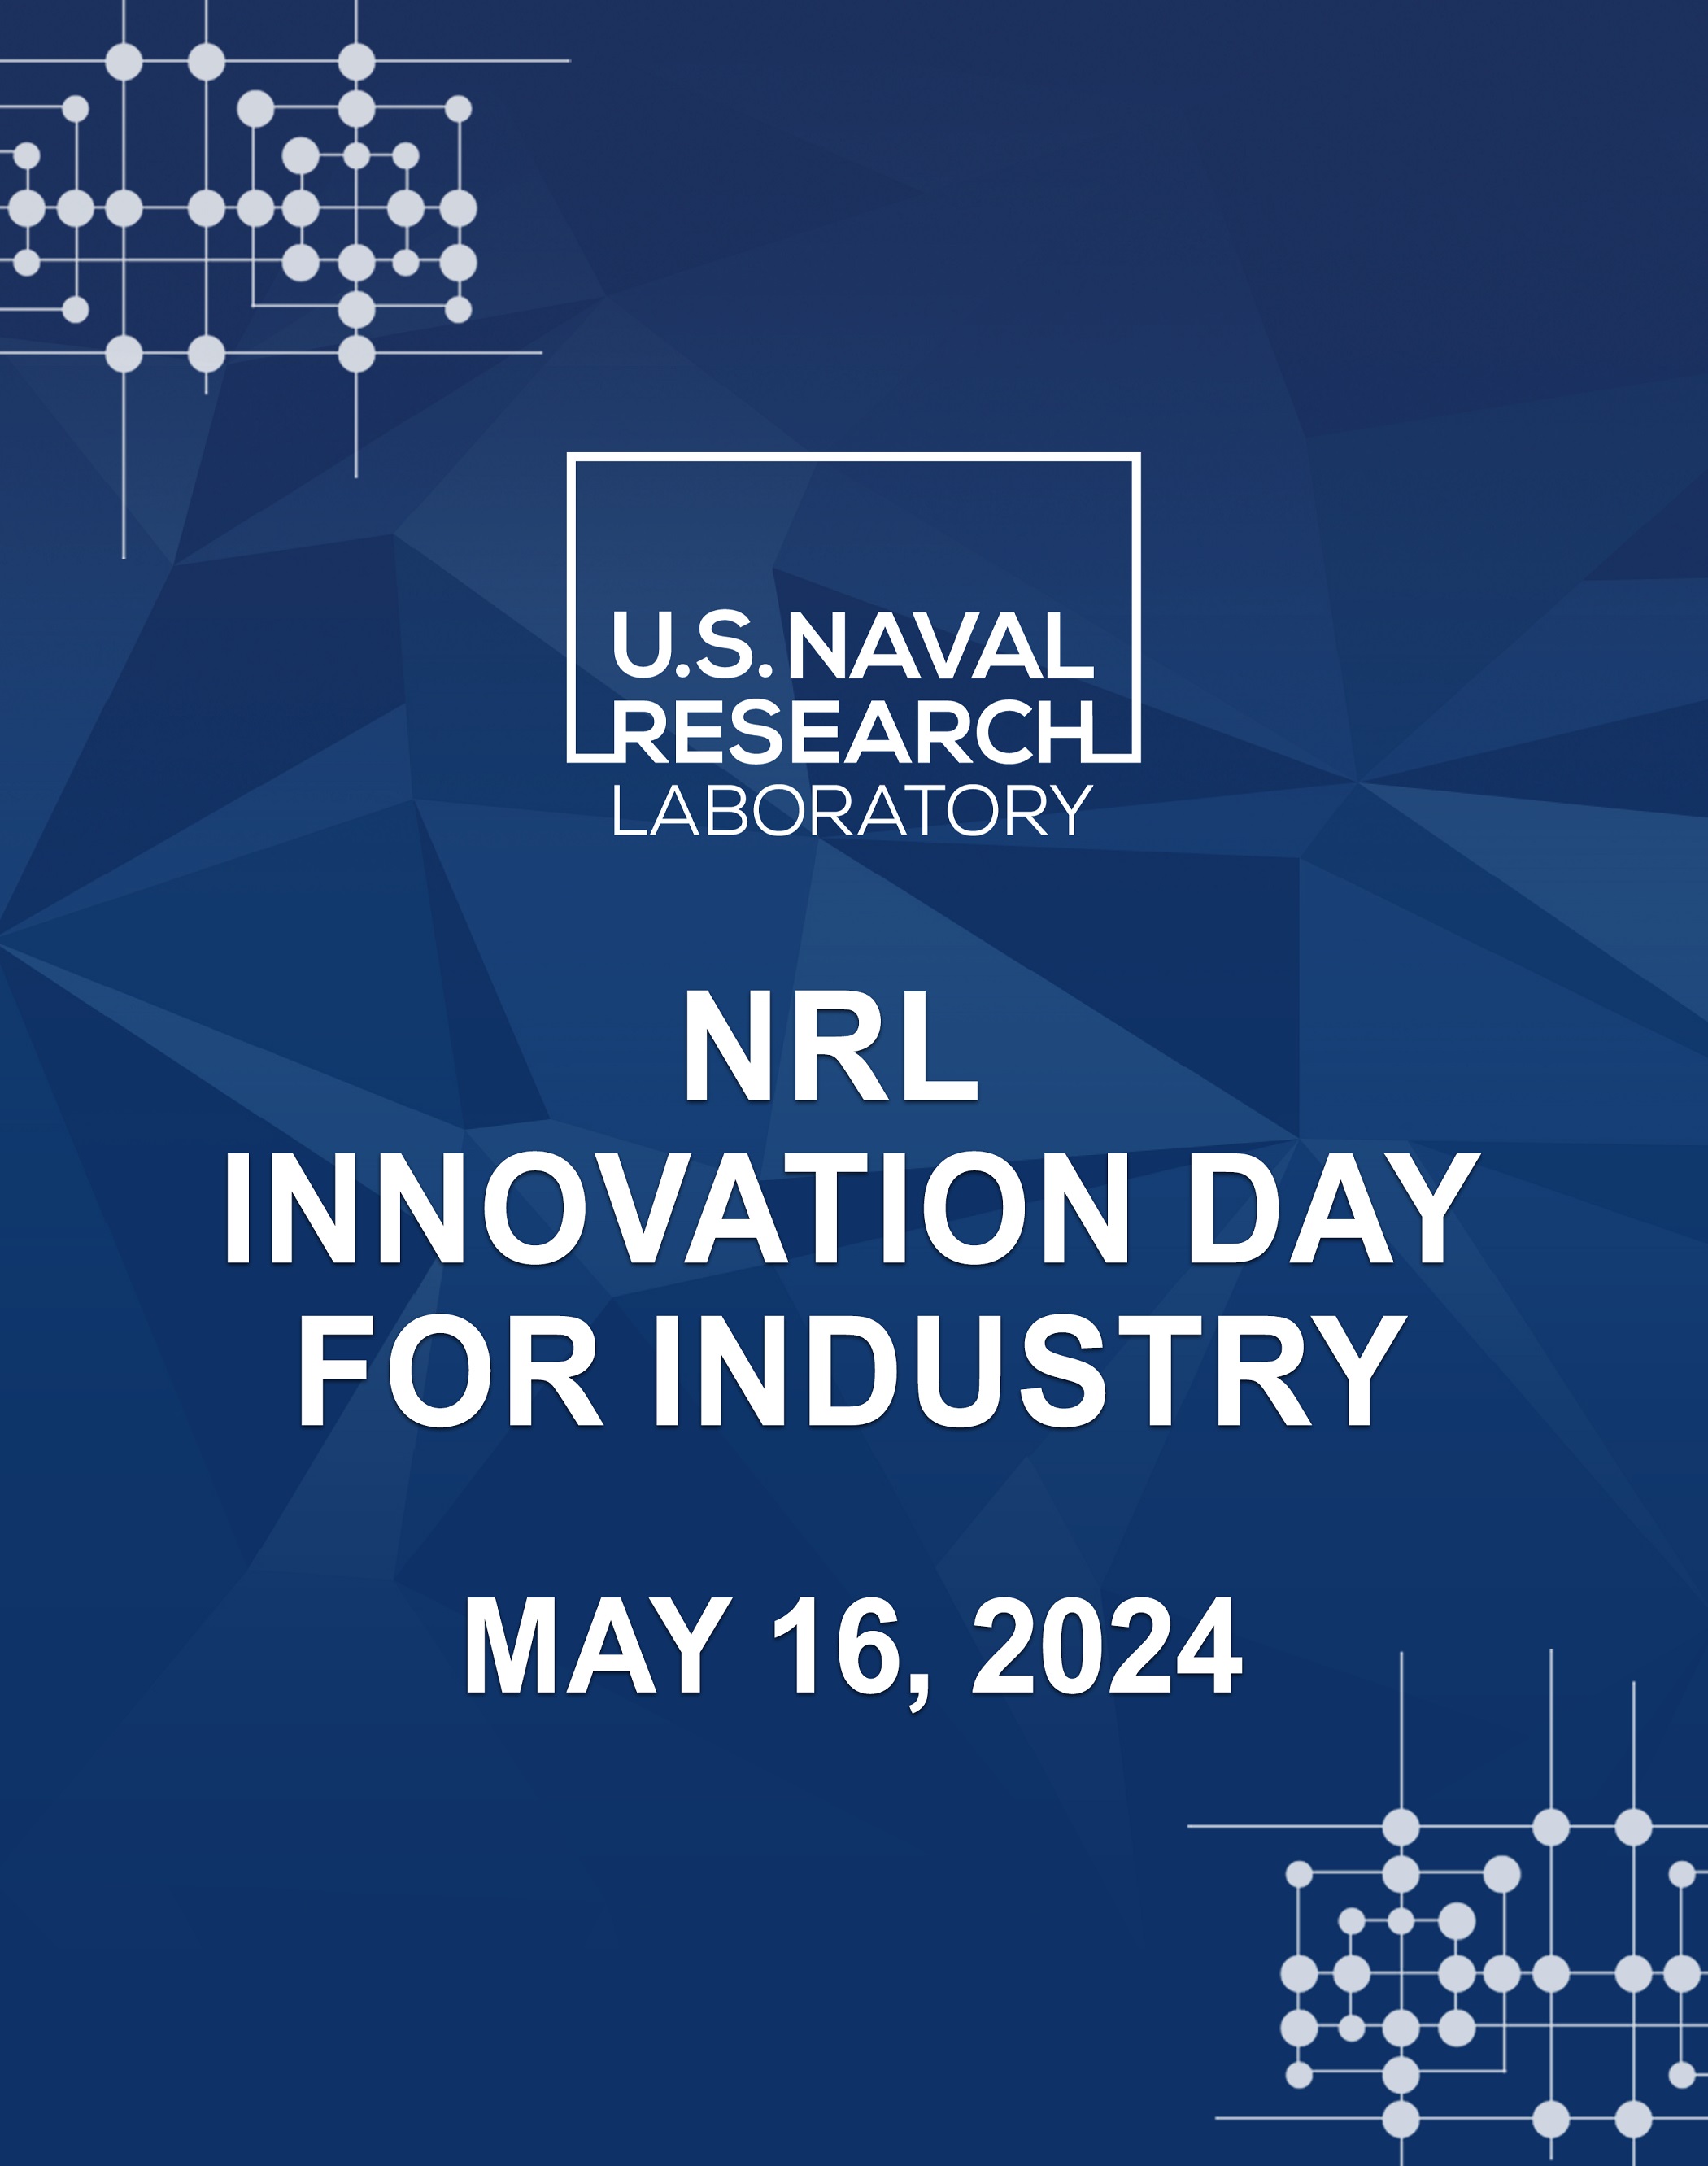 NRL Innovation Day for Industry